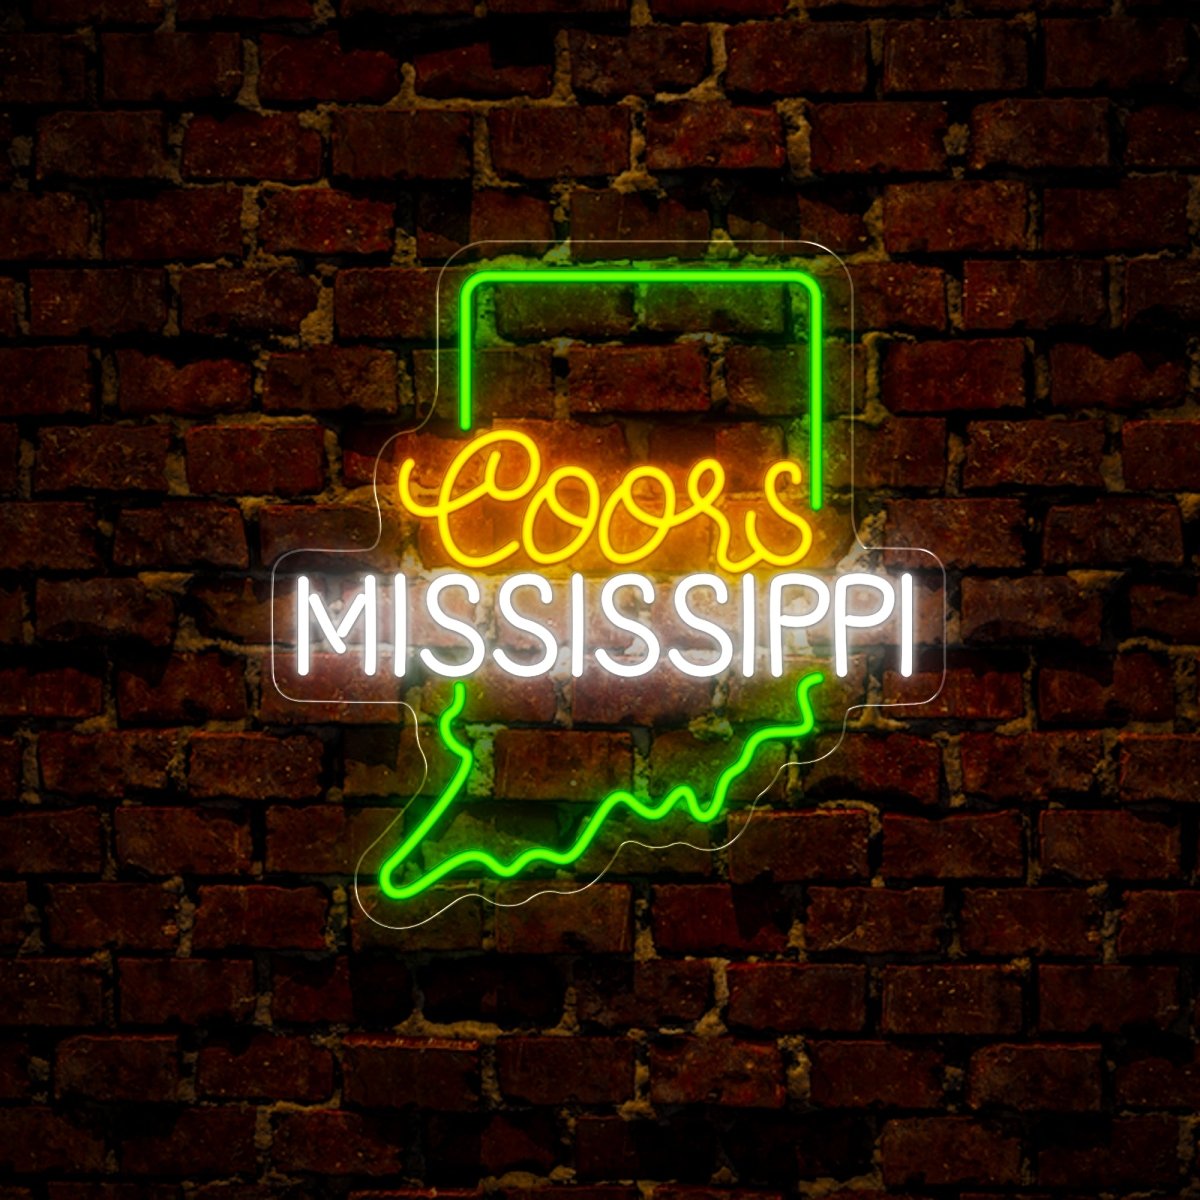 Coors American Mississippi Maps Neon Sign - Reels Custom